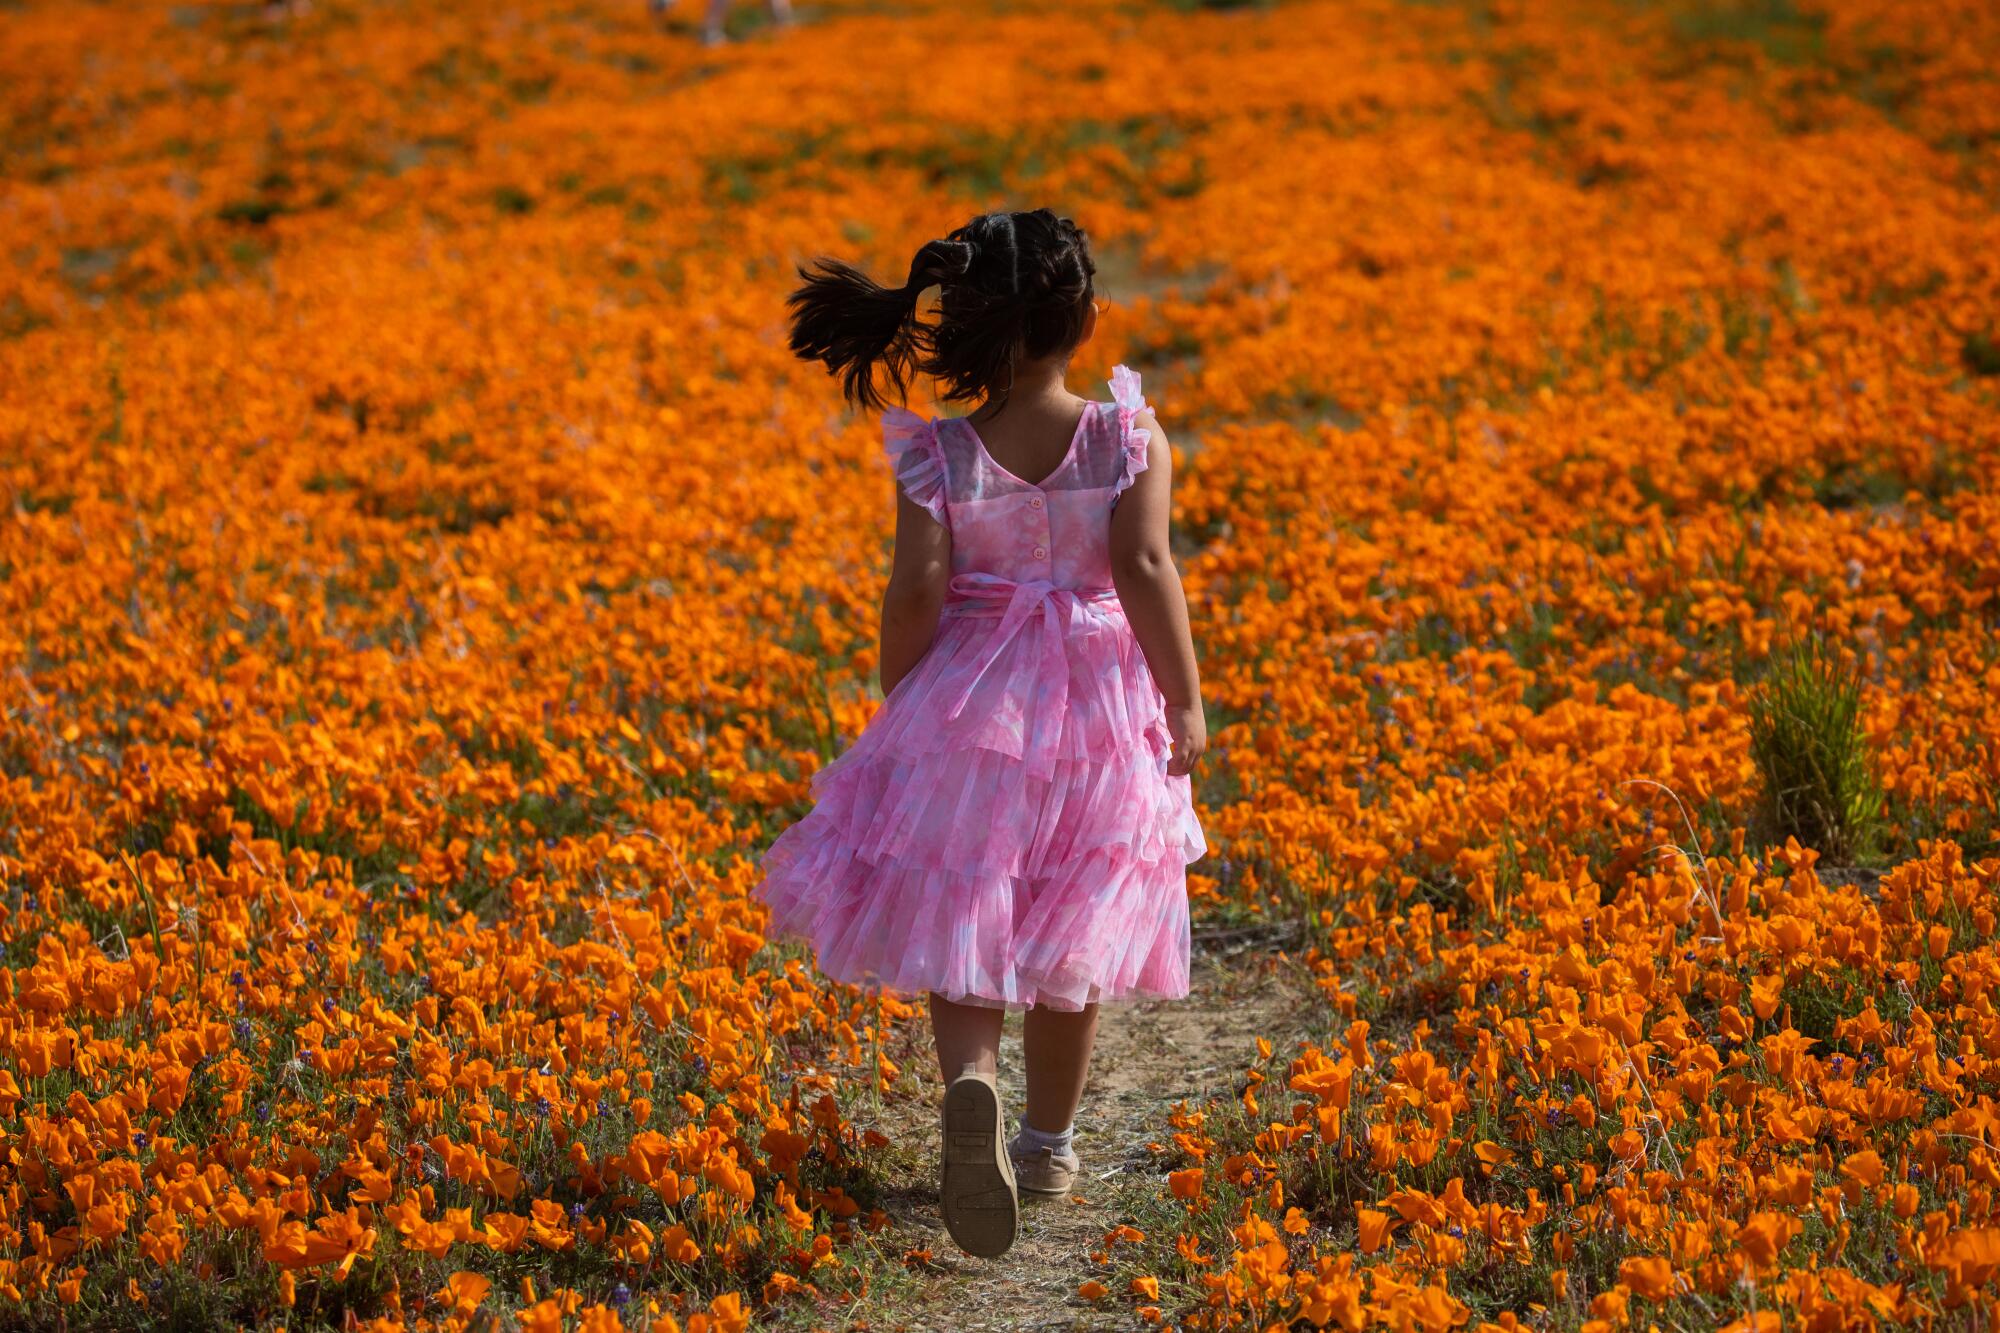 A girl, wearing a pink dress and pigtails, walks on a trail in a field of bright, orange flowers.